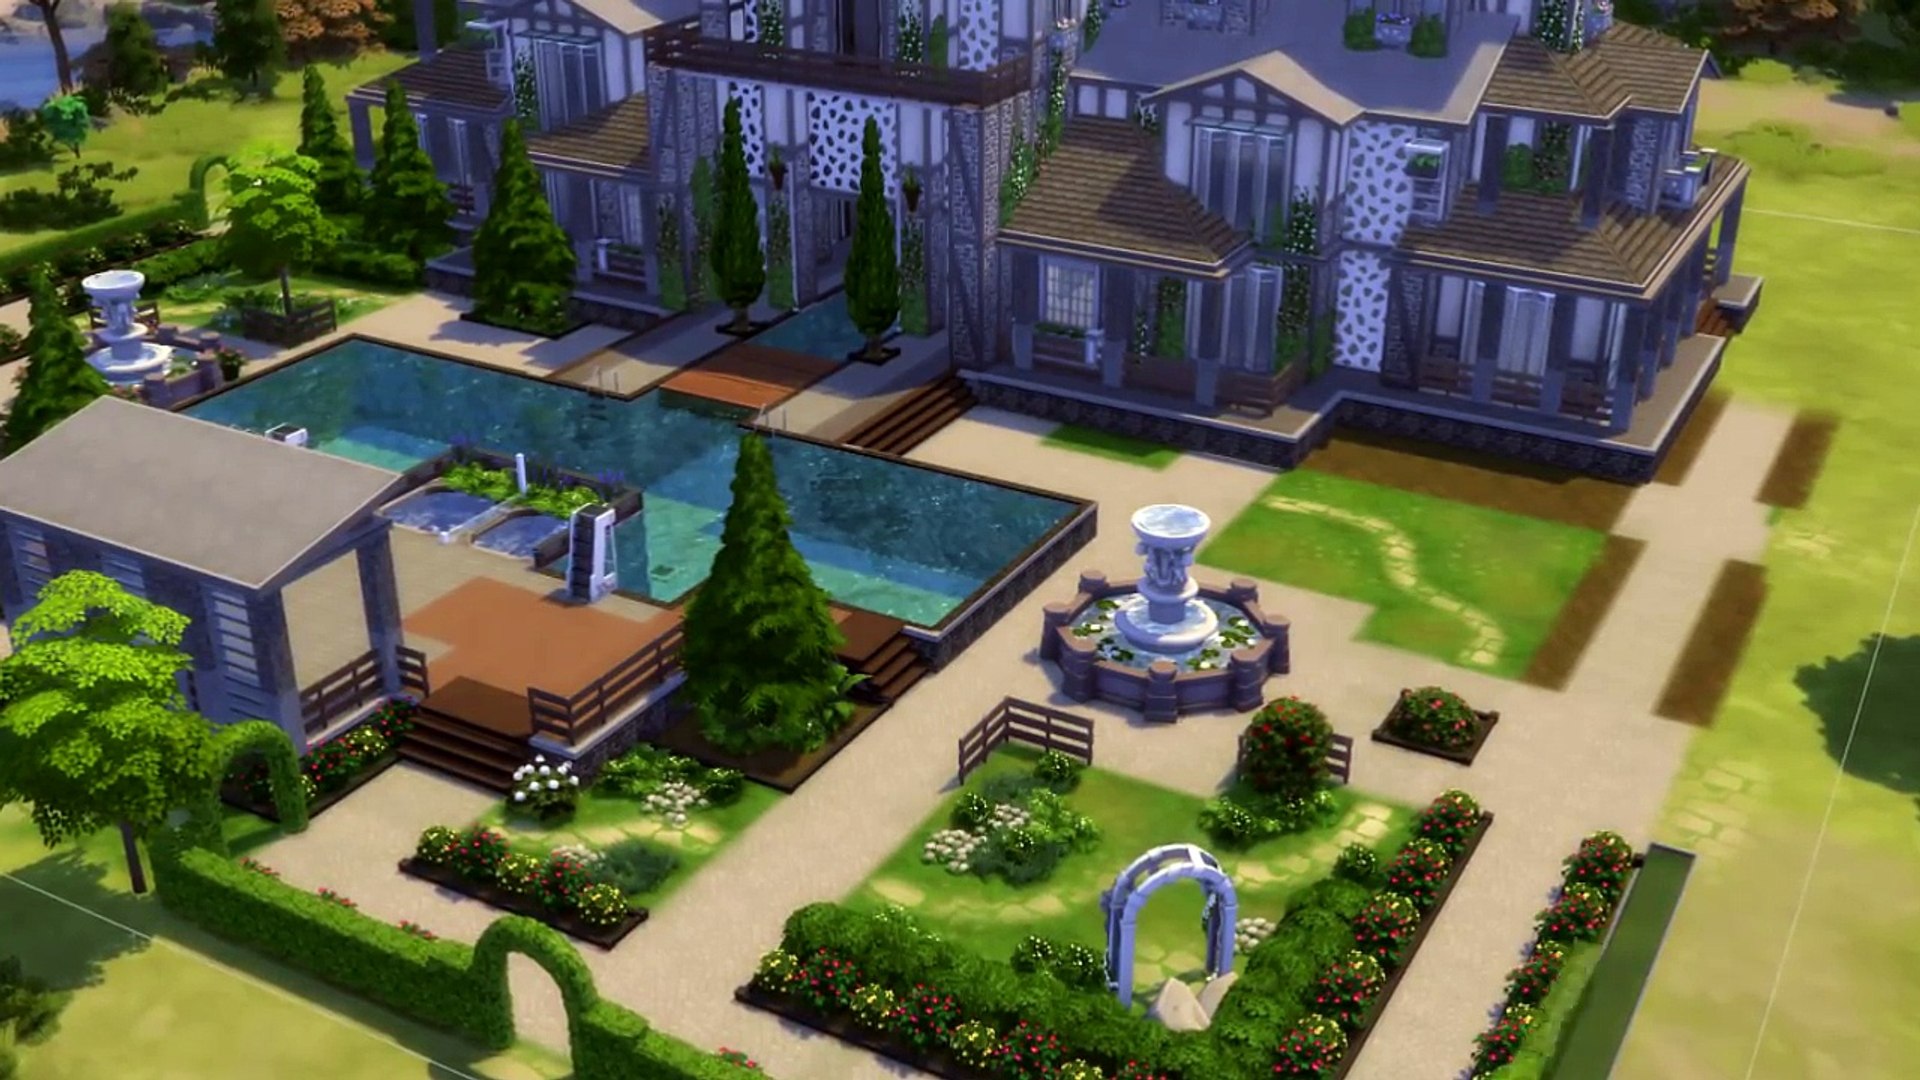 The Sims 4 House Building The Edward Mansion Blockbuster